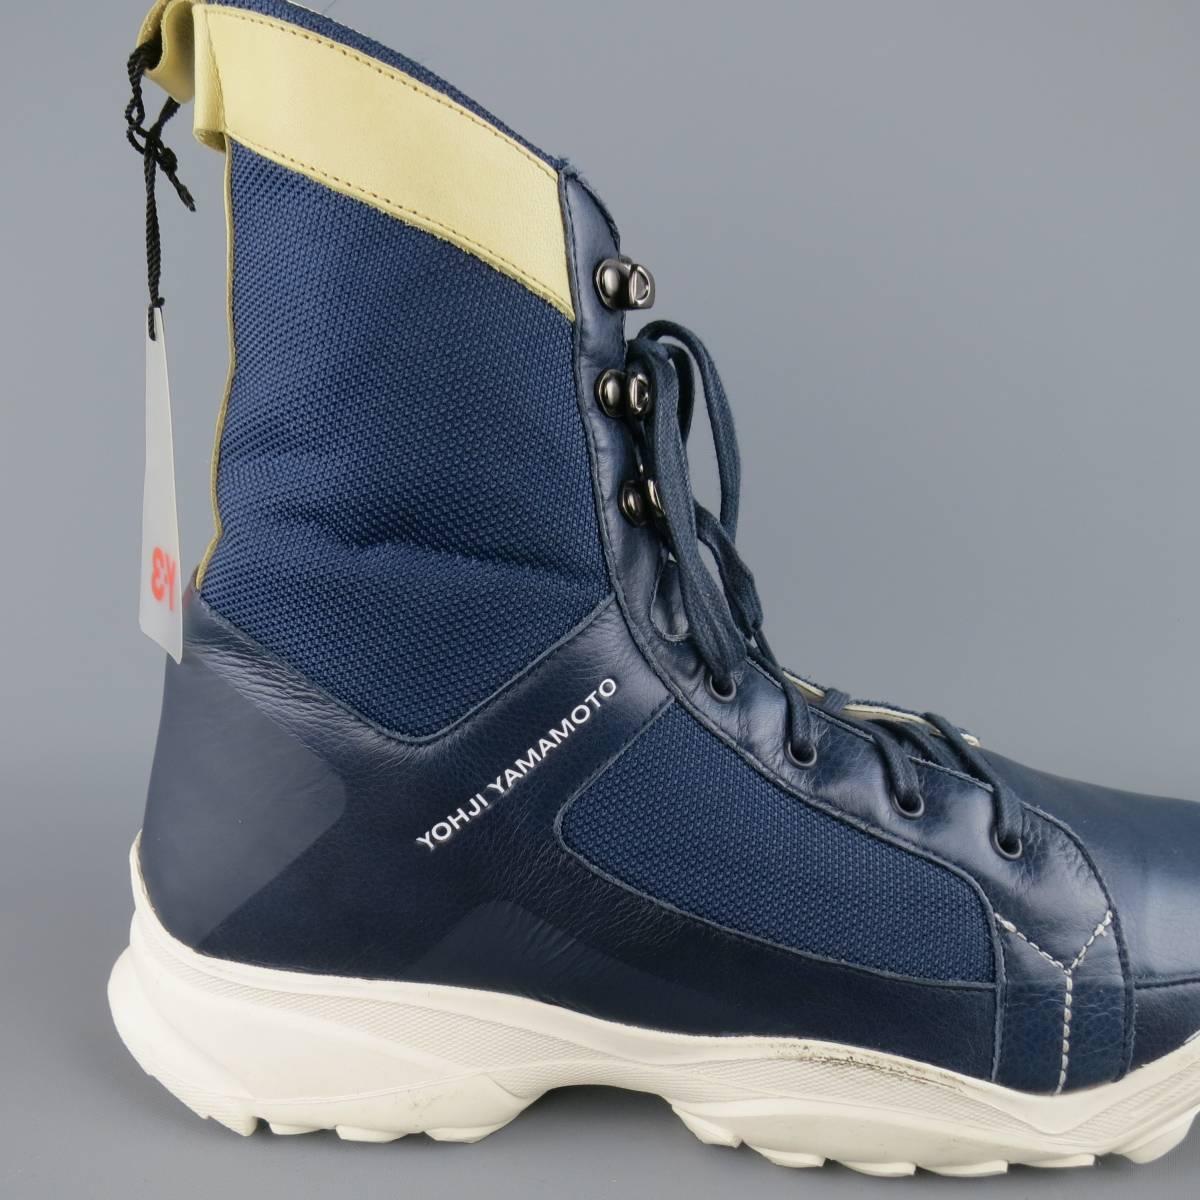 Y-3 Adidas by YOHJI YAMAMOTO combat boots come in a navy blue smooth leather and feature a navy mesh shaft, beige leather trim, lace up front with gunmetal ski hooks, and thick white rubber sole. New with scuff on sole from storage. As-Is.
